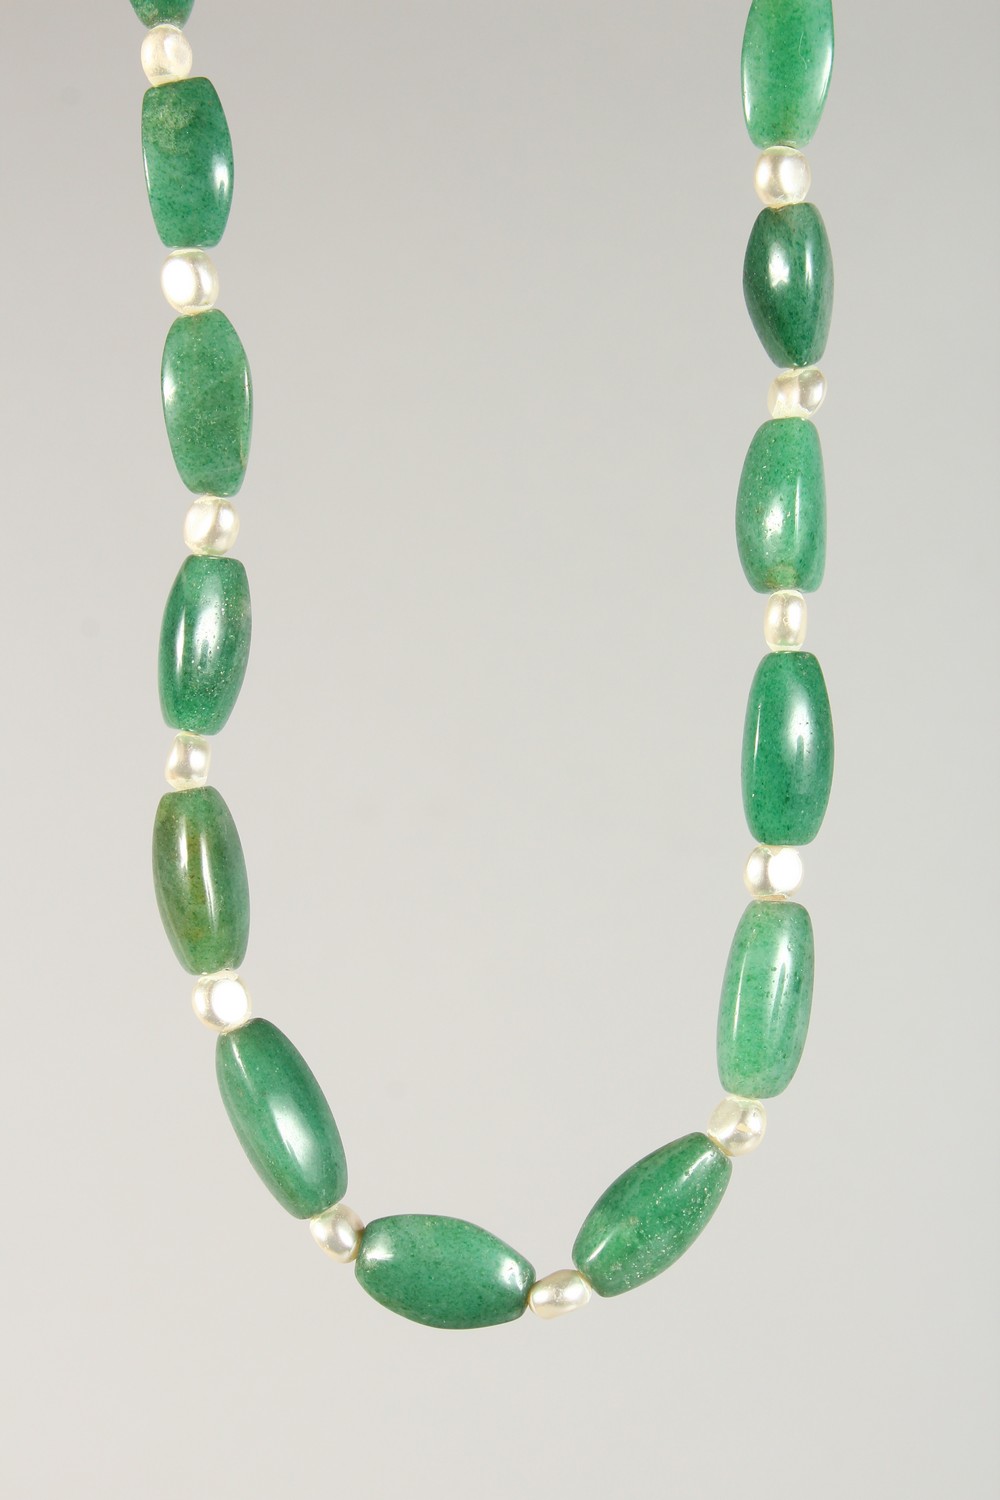 A GOOD CHINESE JADE / JADELIKE HARDSTONE & PEARL ELONGATED NECKLACE, 72cm open.